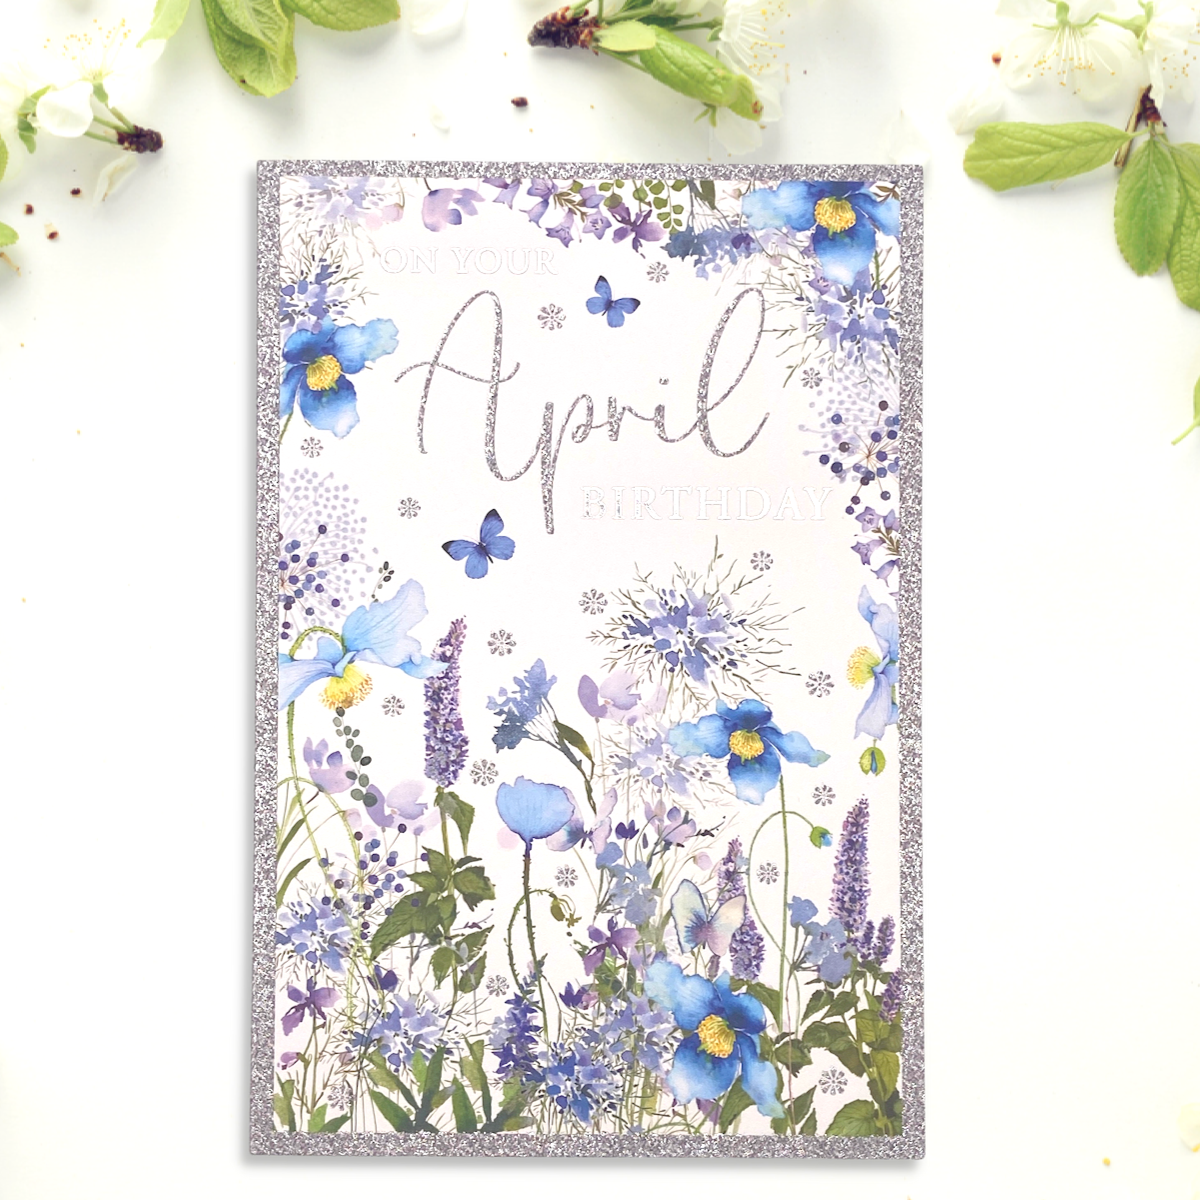 Pizazz April Month Birthday Card Displayed In Full